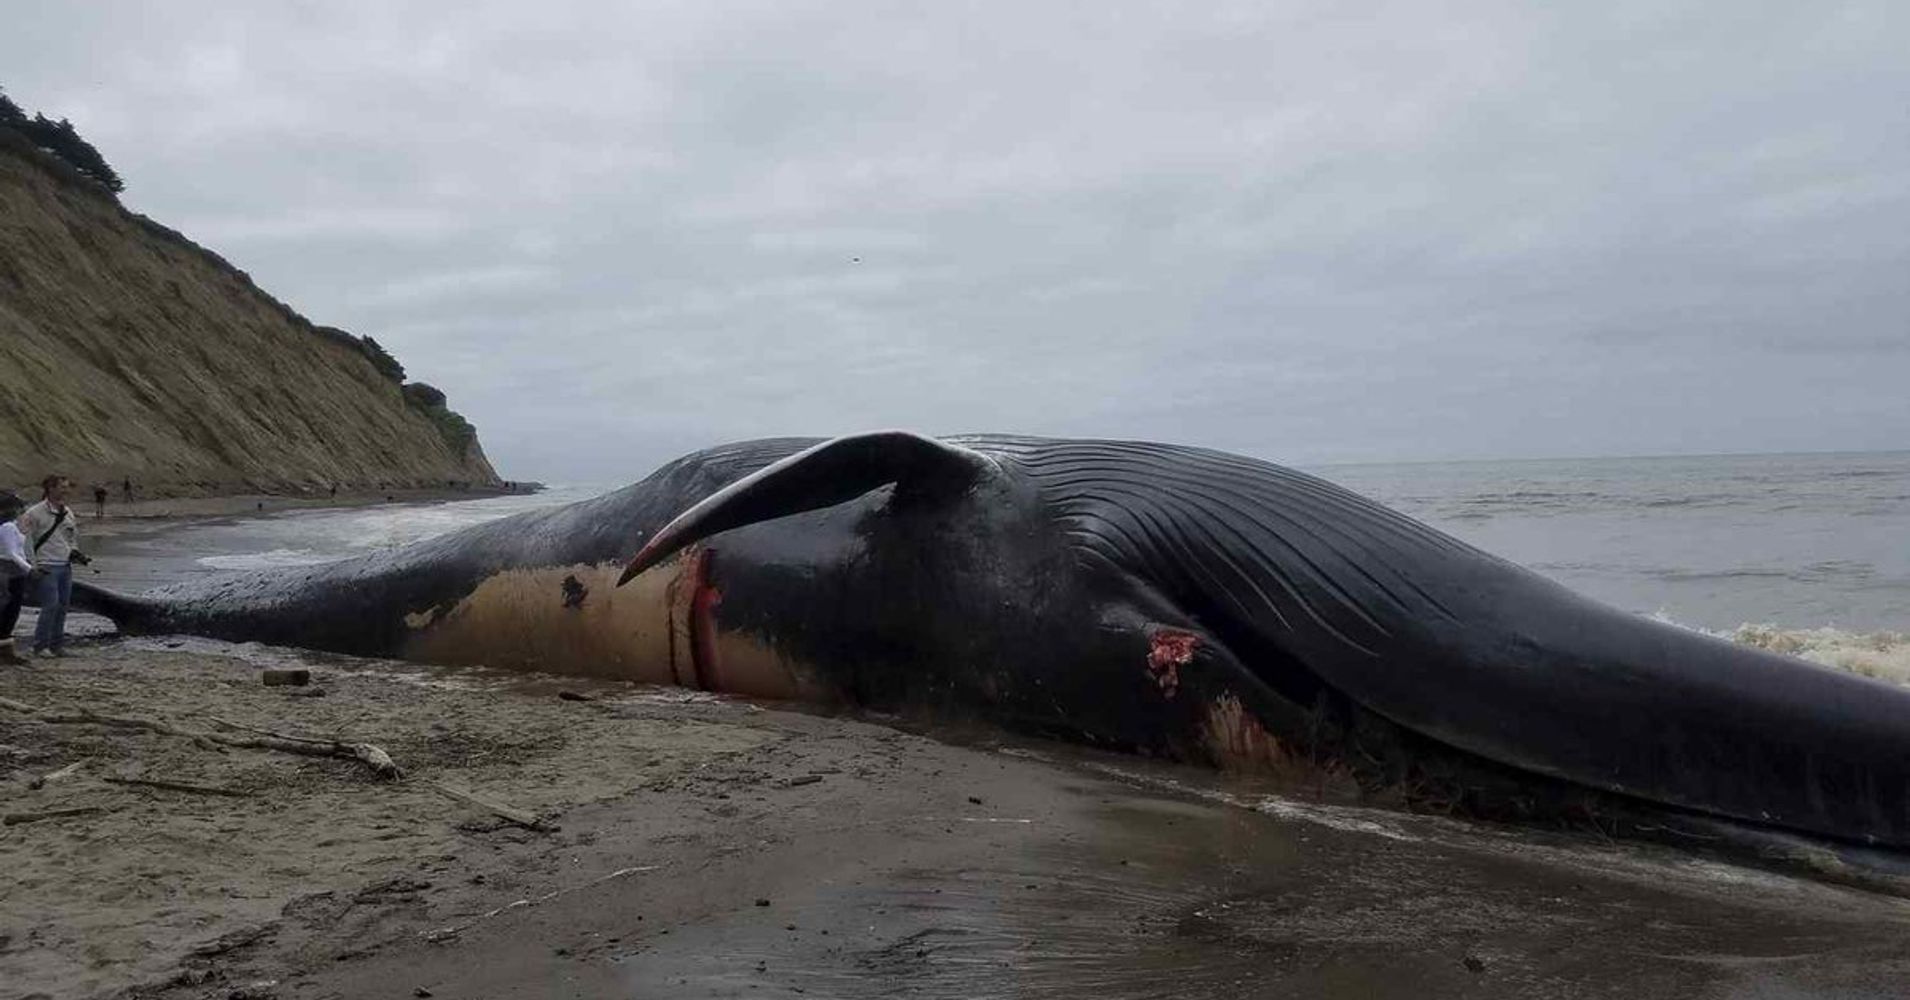 Blue Whale On Northern California Beach Likely Struck By Ship - HuffPost